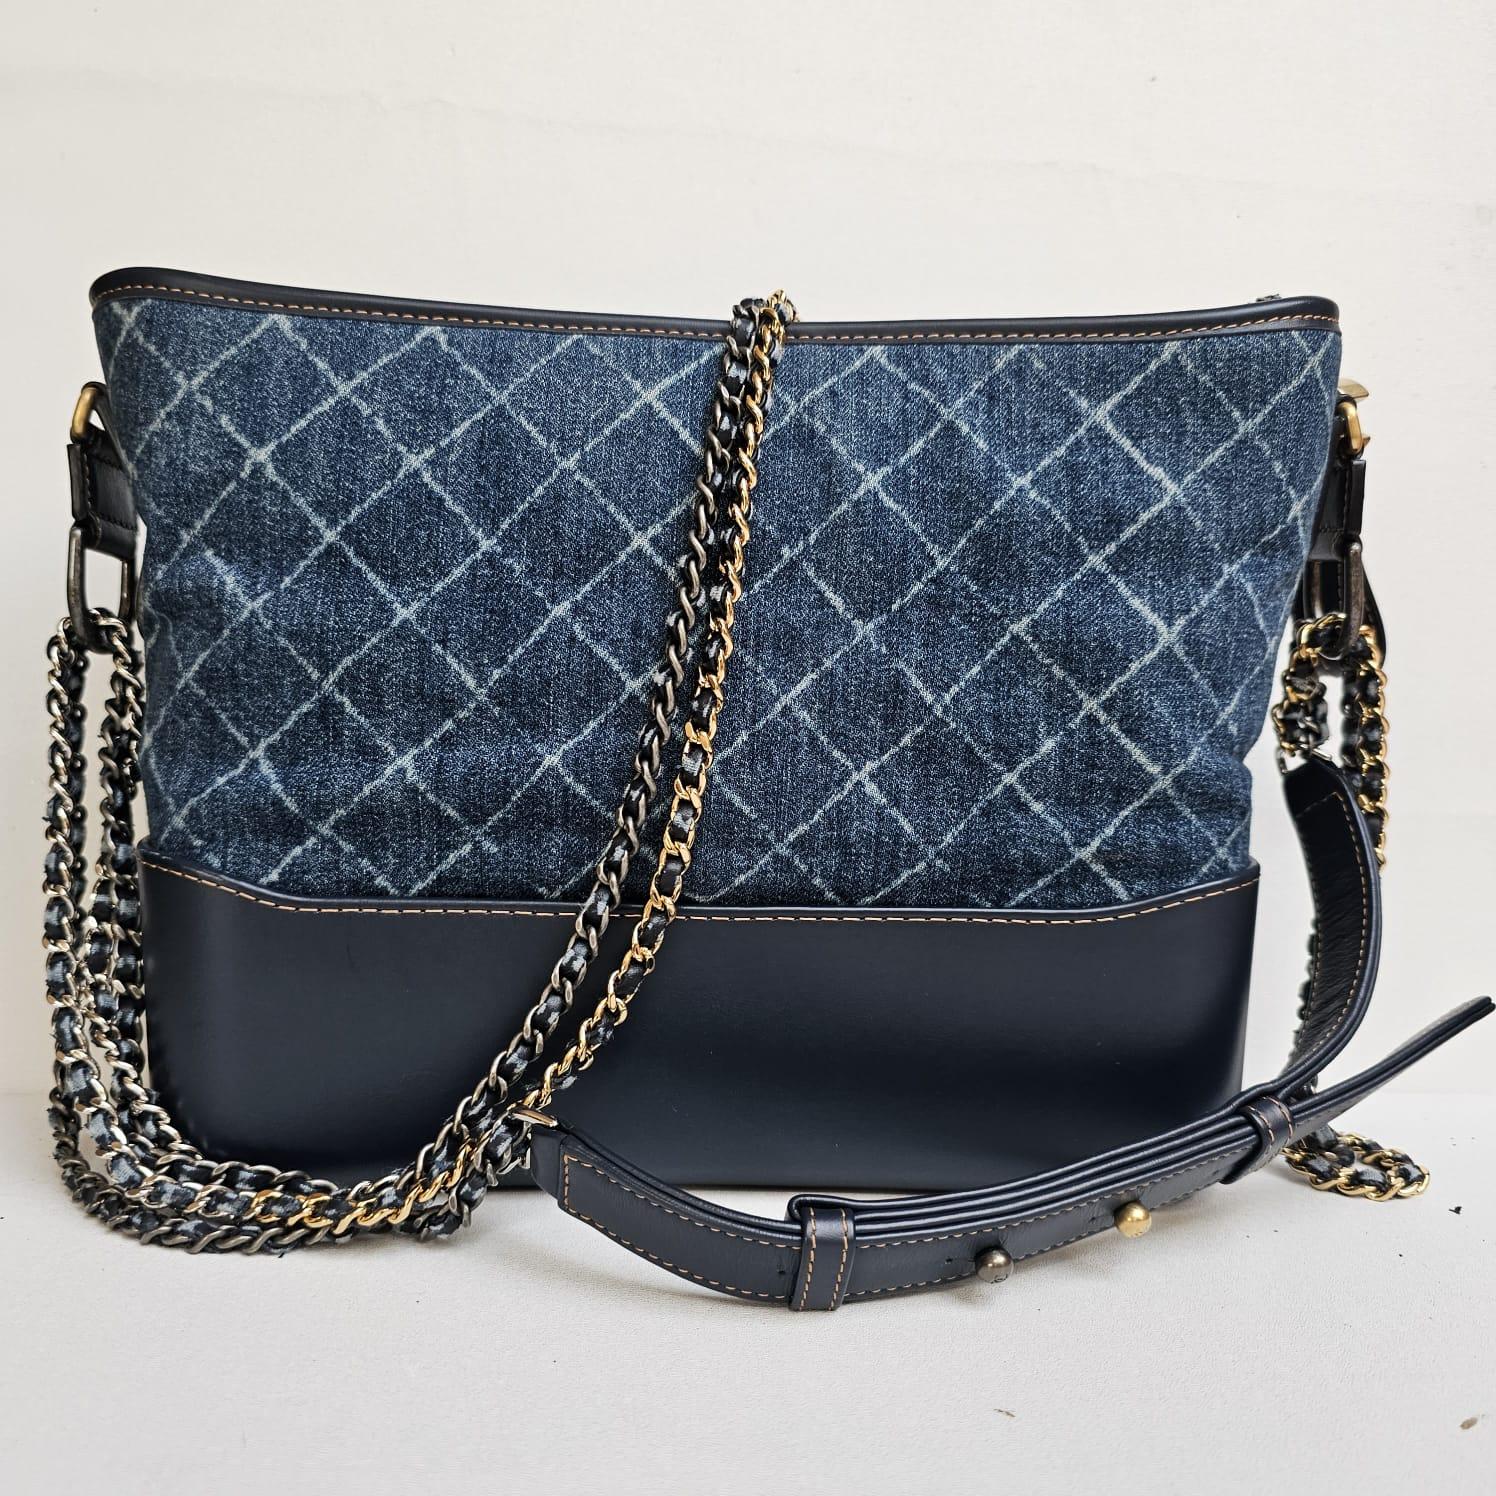 Classic gabrielle bag in denim quilt. Large size. Overall still in great condition, with slight peeling on the leather coating of the interwoven strap. Comes with holo, card and dust bag. Series #25.